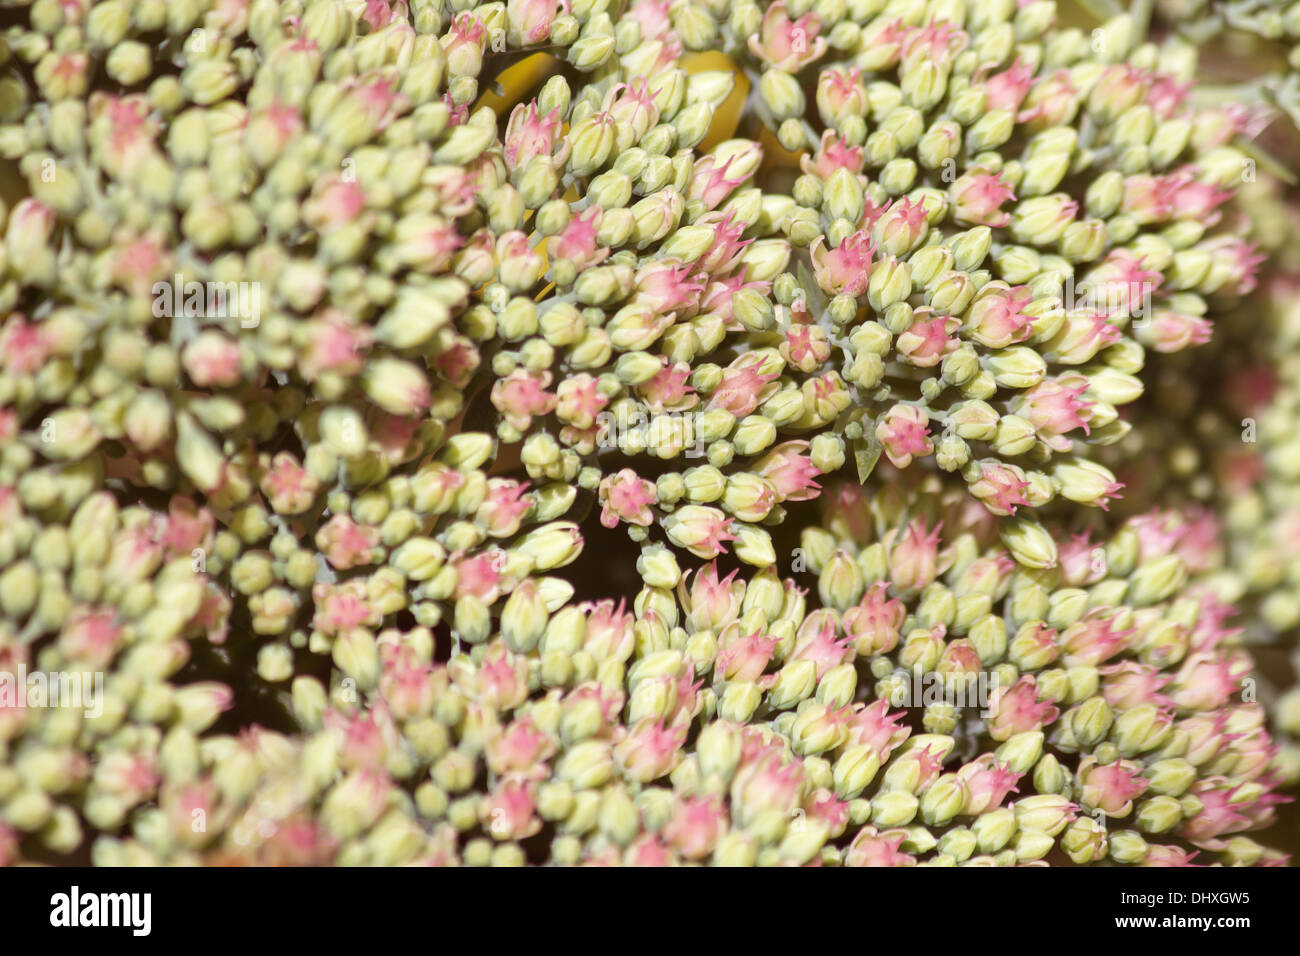 Plant flower buds of a fat hen Stock Photo